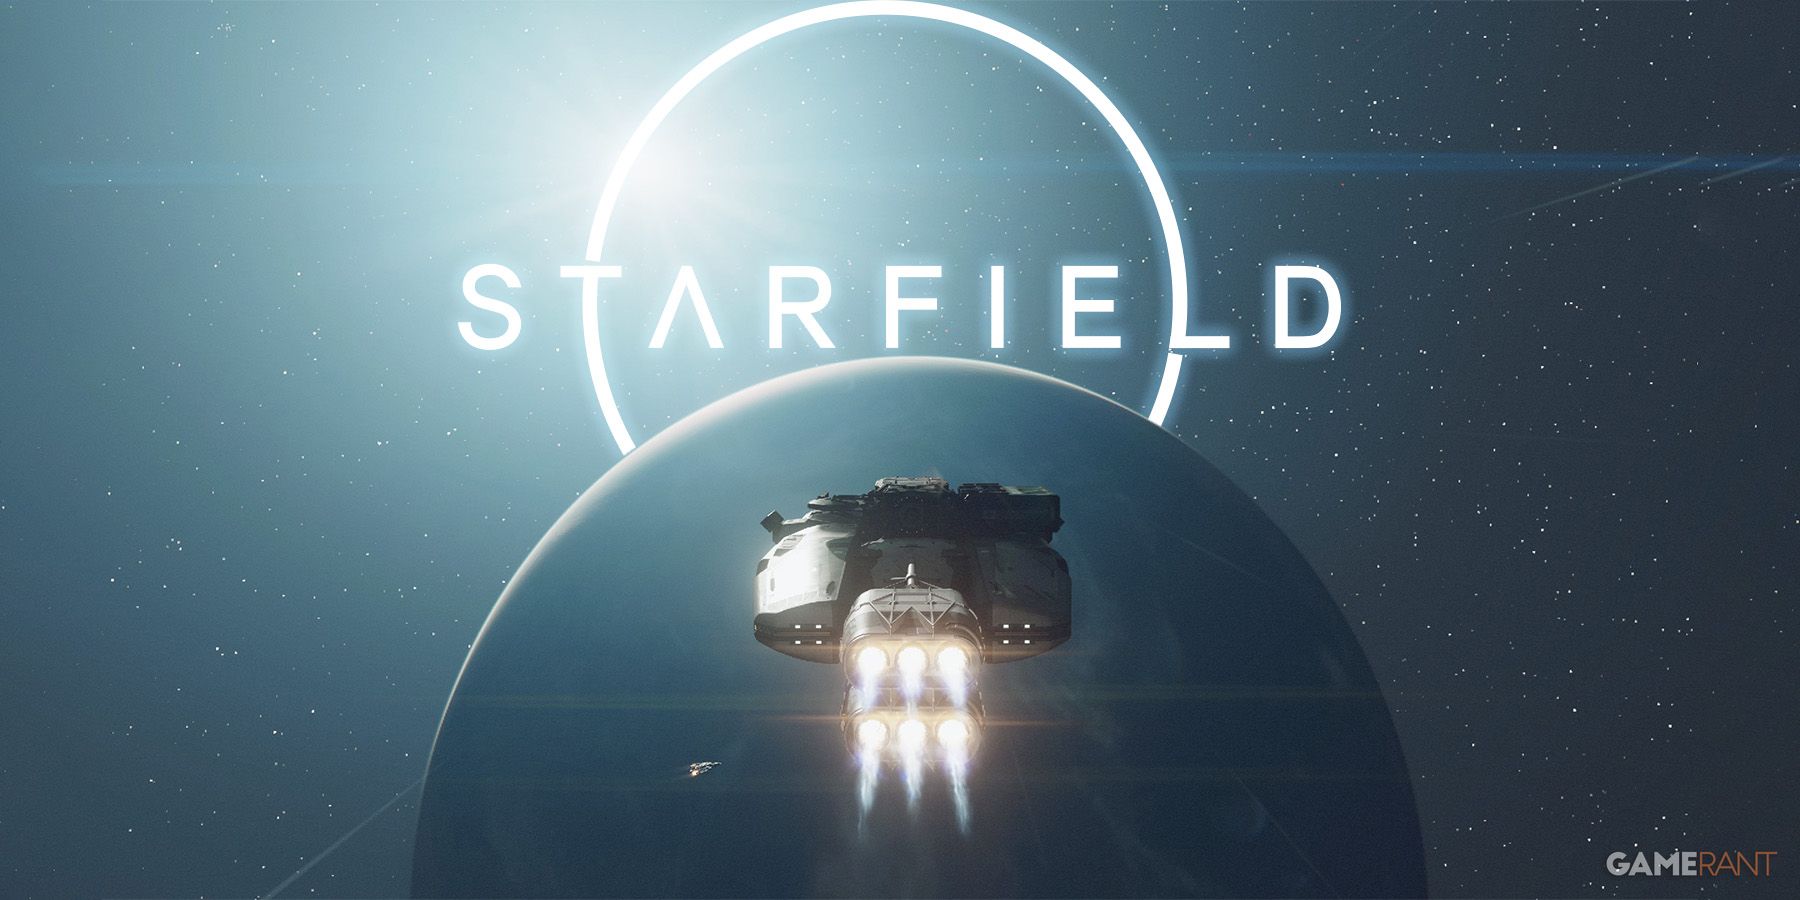 Starfield large ship approaching planet with game logo composite